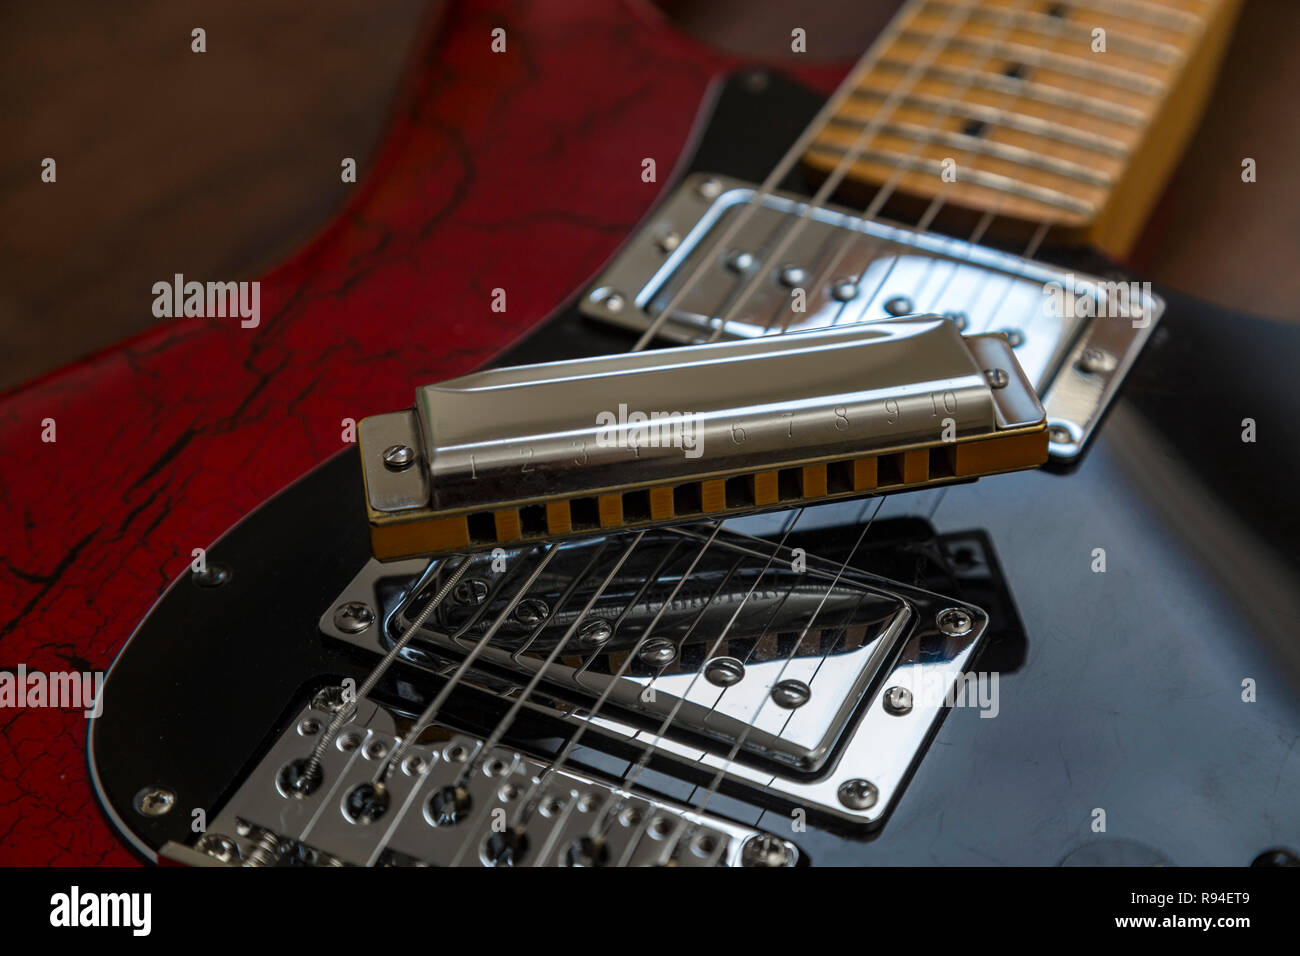 Harmonica on an old electric guitar. Blues, rock music, Stock Photo